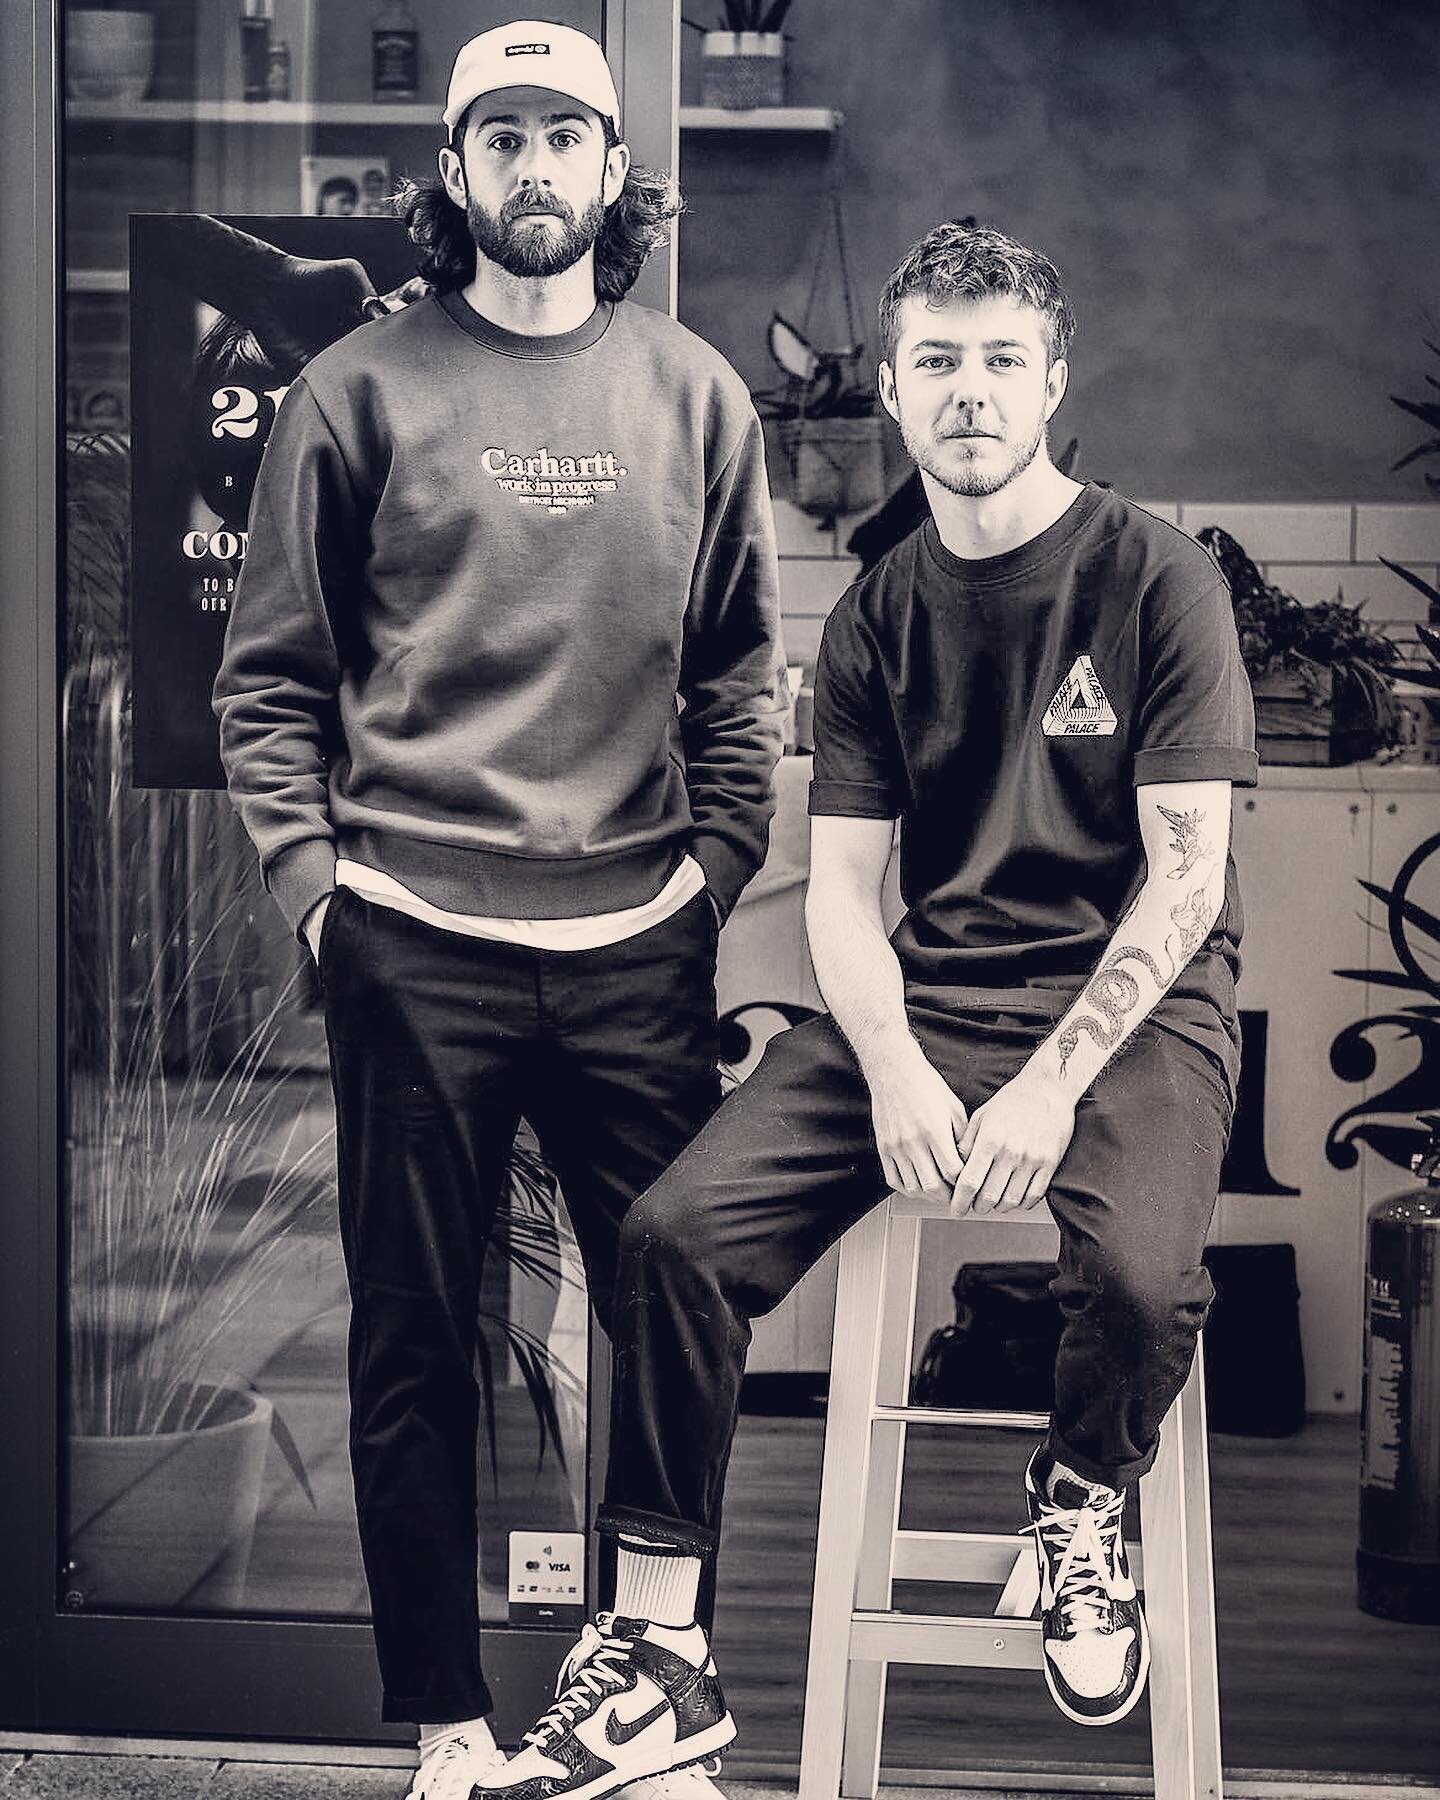 M E R R Y . C H R I S T M A S

Whatever you are doing today; celebrating or not - we wish you all the happiness and positivity 🤙🏼

Big Love

Aaron + Ben
 ❤️❤️❤️

#2112barbers #merrychristmas #barberlife #newbury #christmasbarber #xmas #barberlove #